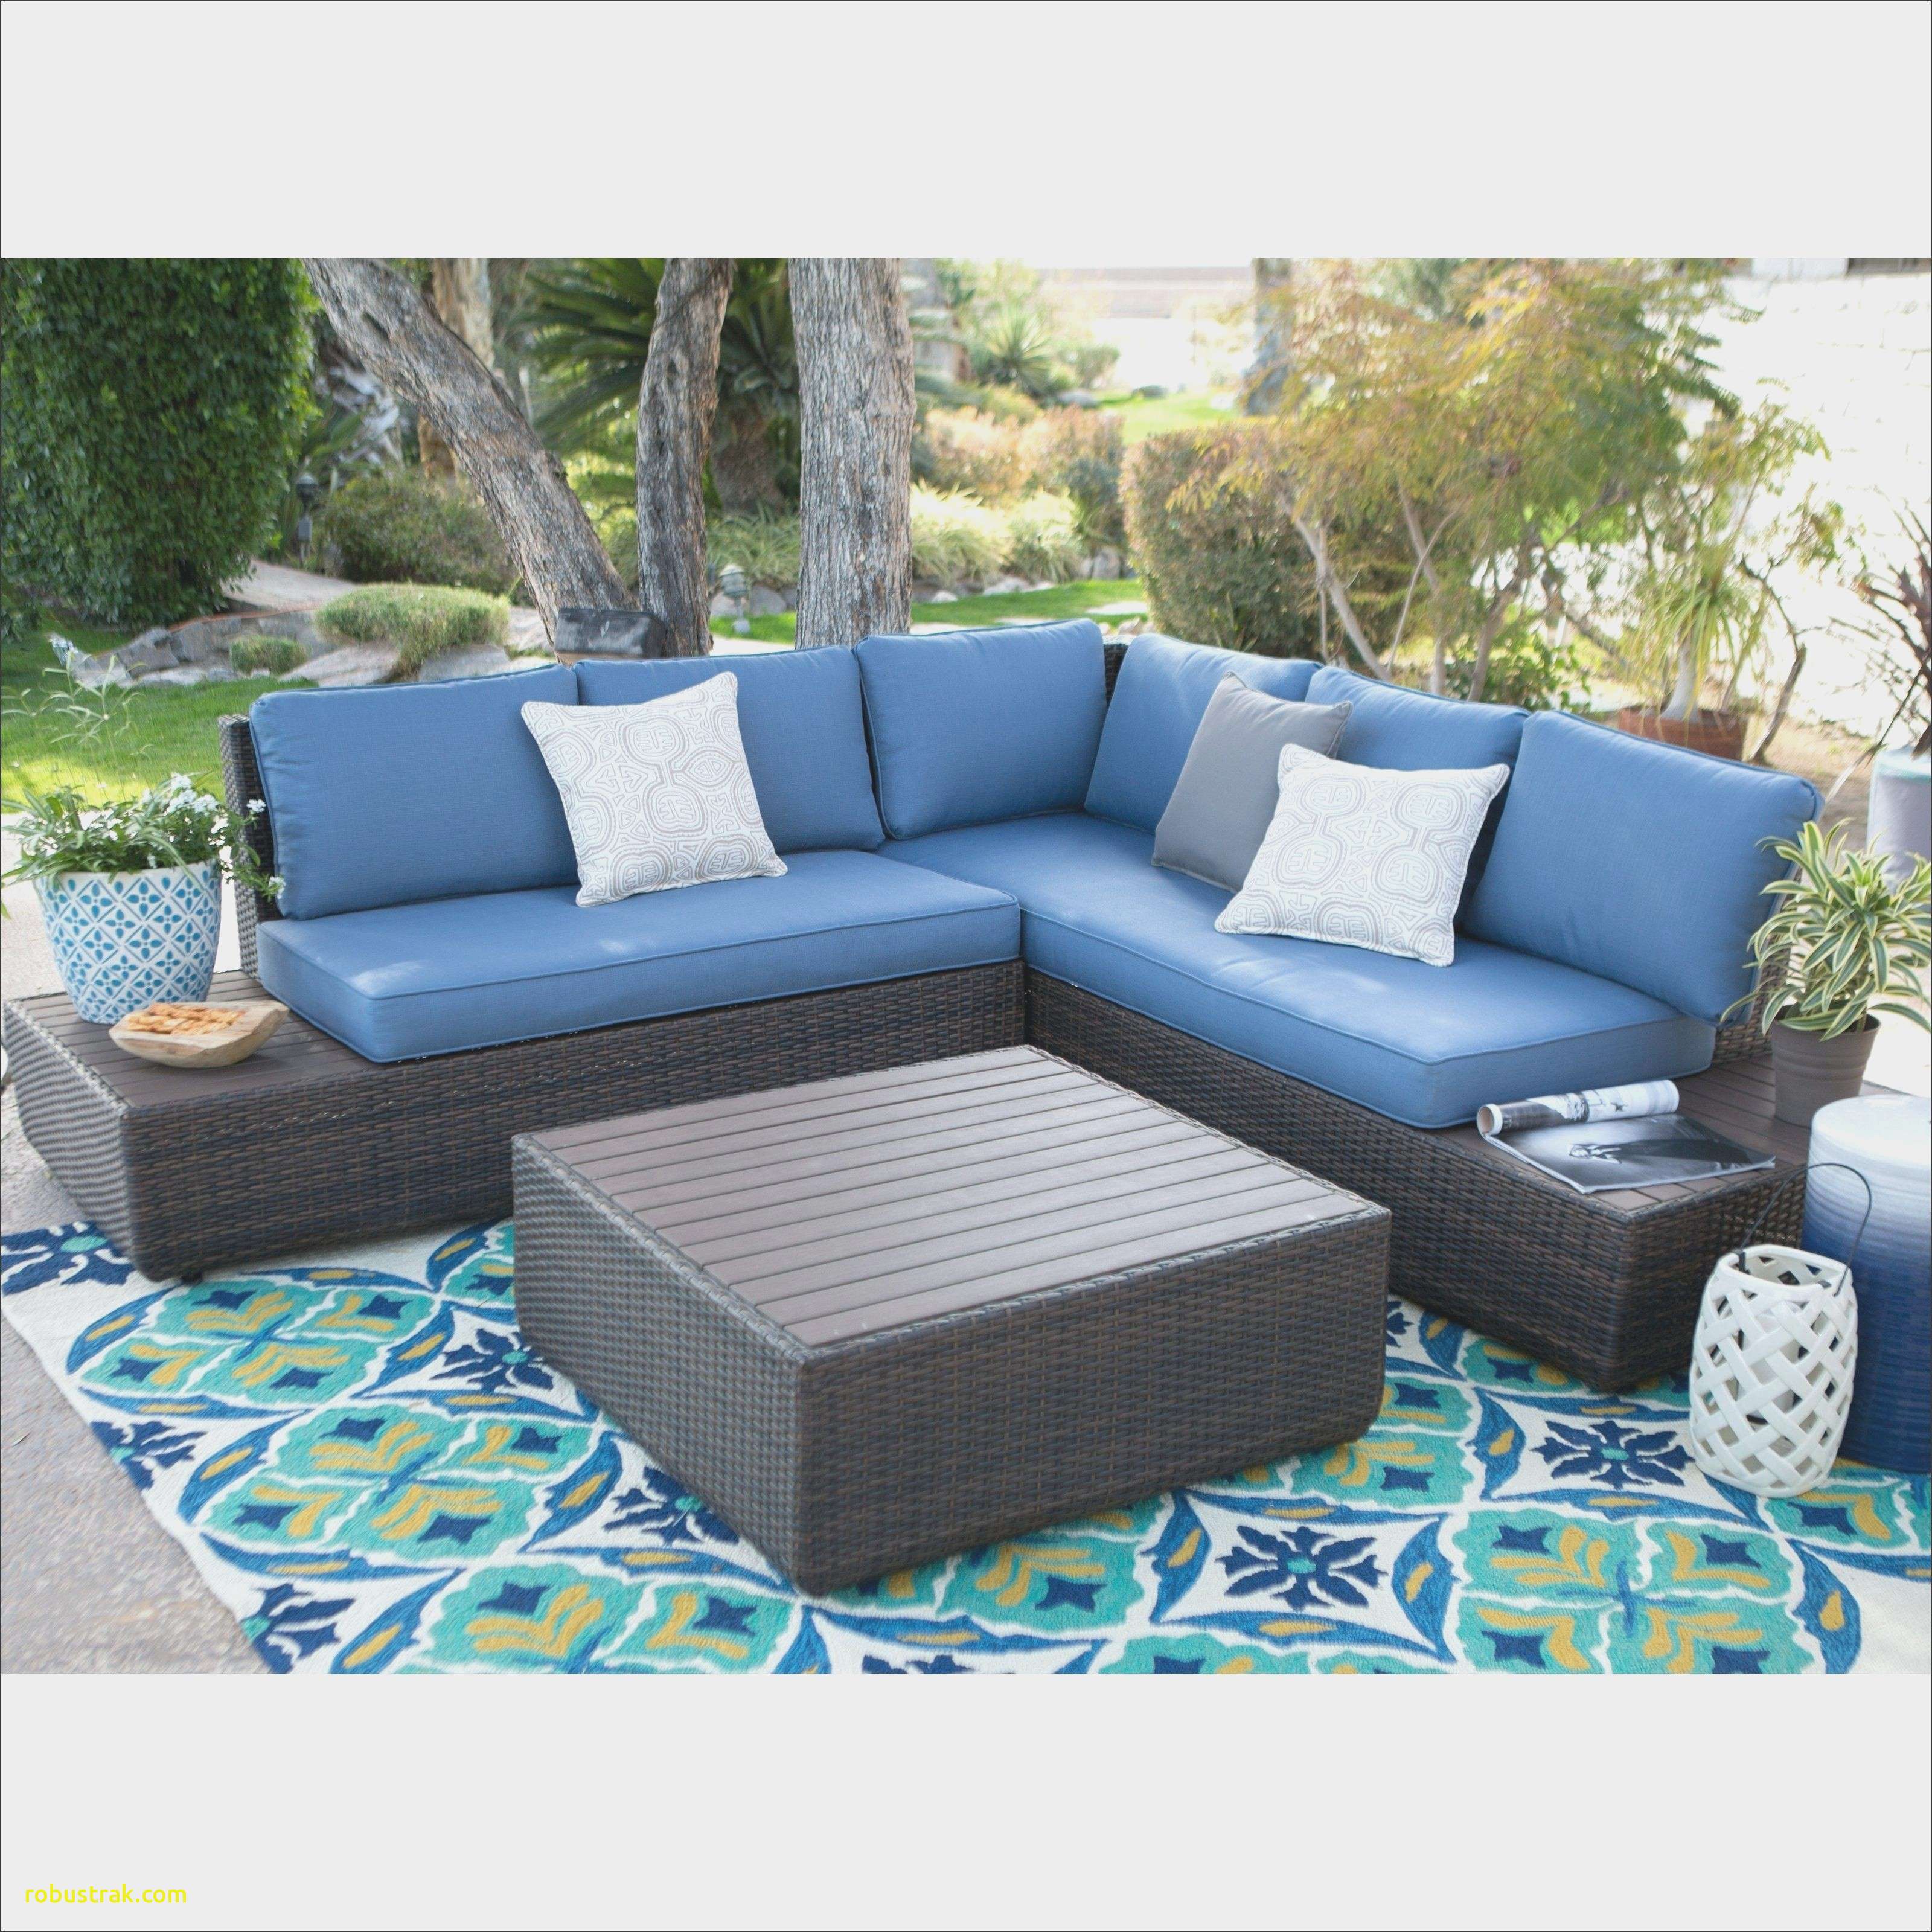 elegant height coffee table home design ideas beautiful fresh outdoor side blue full size furniture patio new tables wicker sofa large square marble round industrial uma tile end